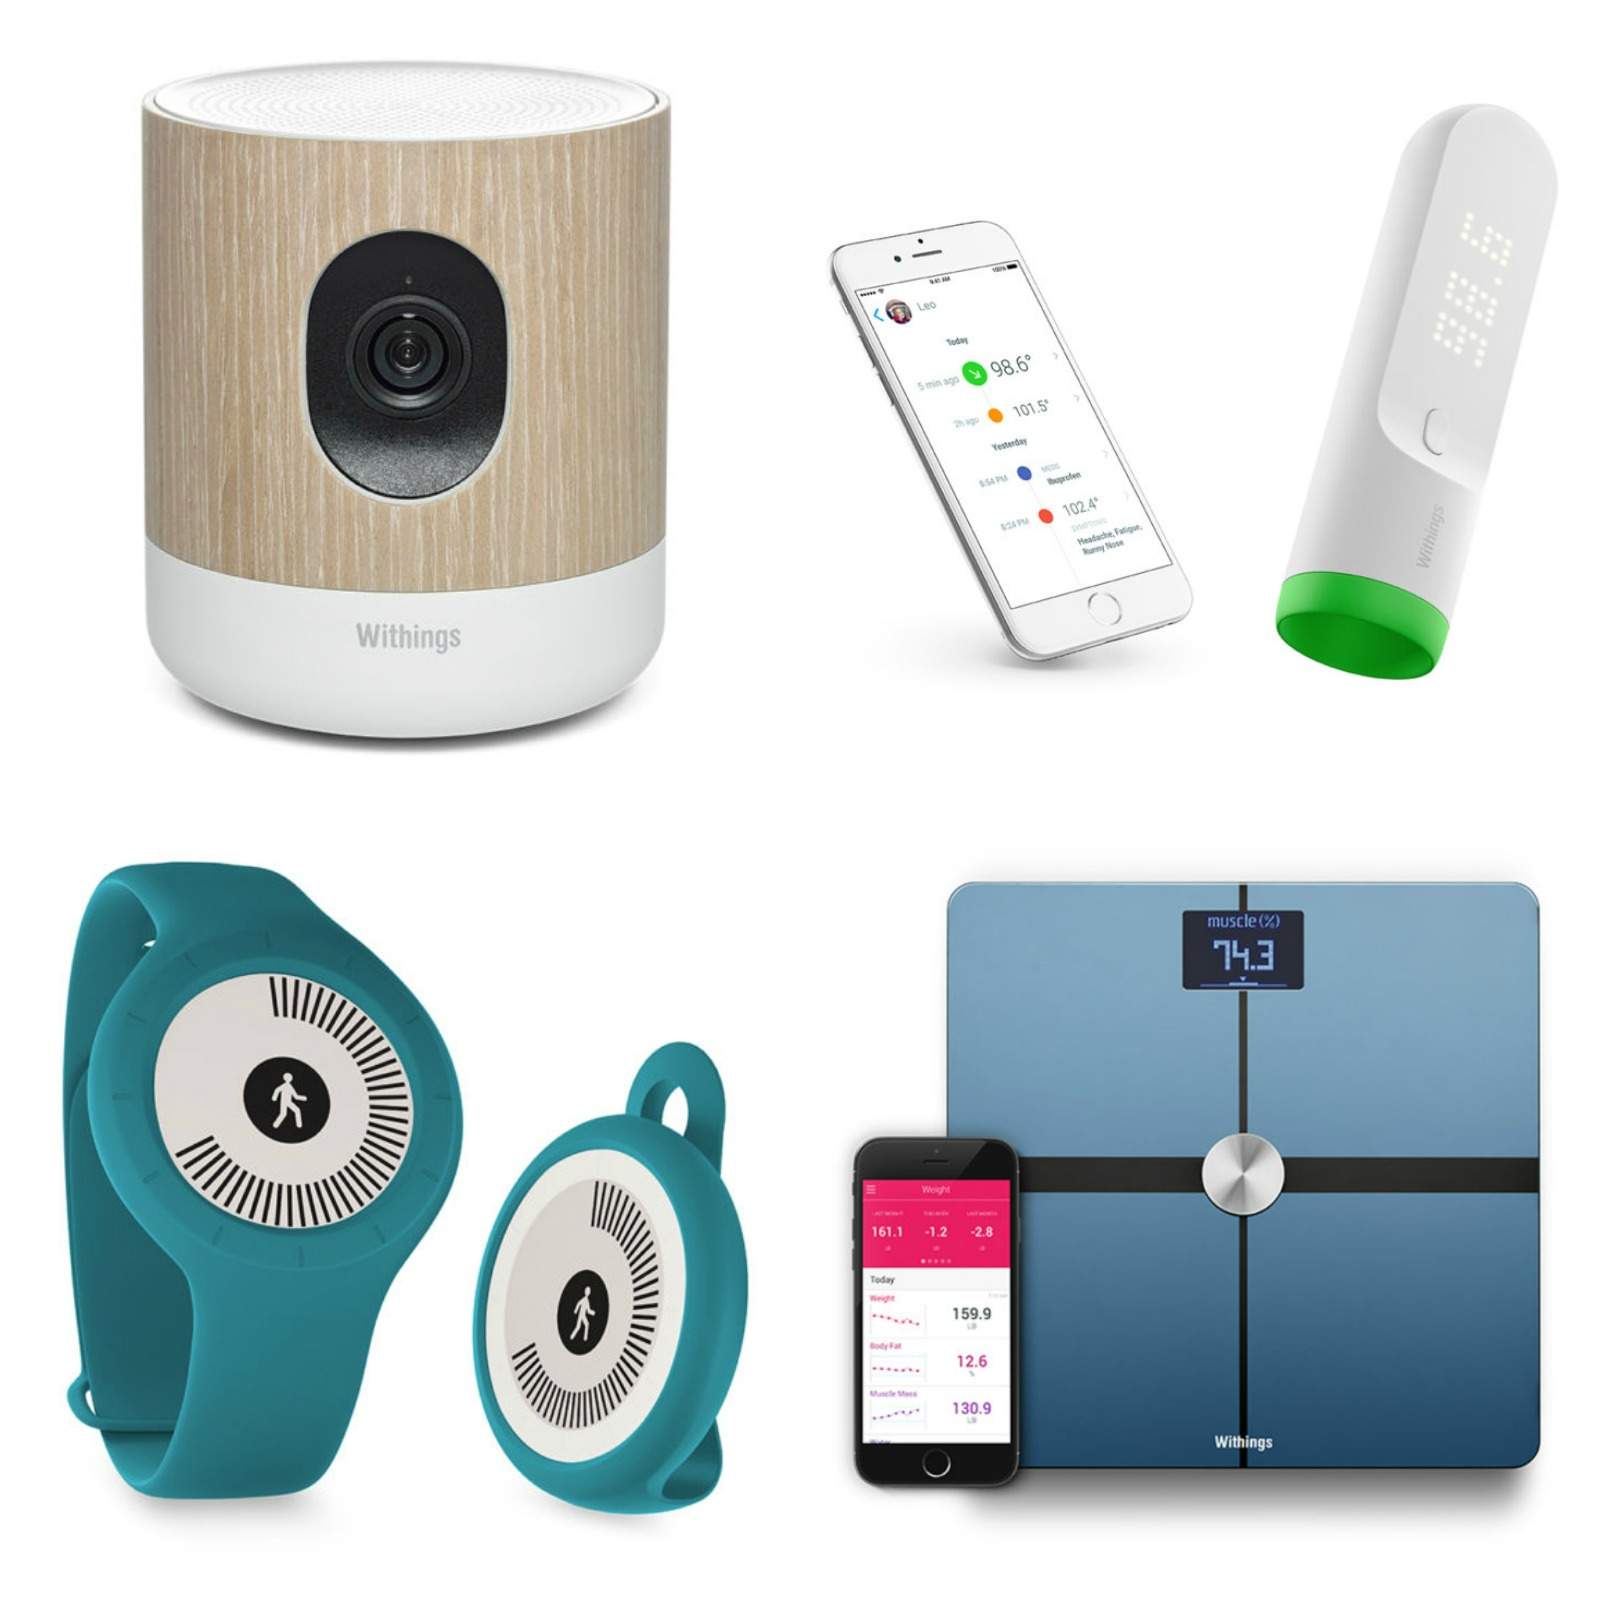 Withings Black Friday gift guide